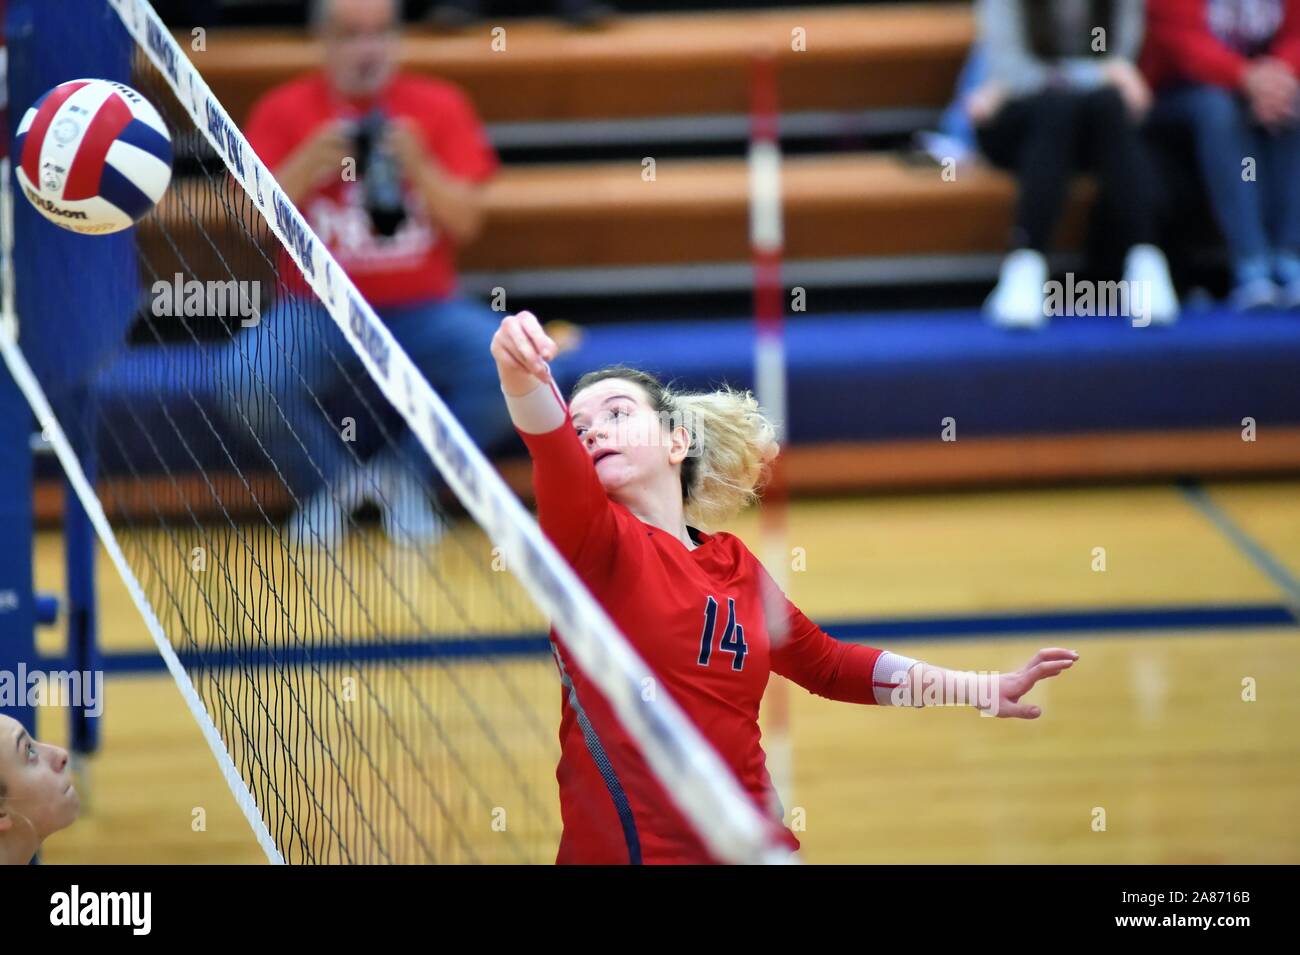 Volleyball player watching the flight of her drop shot. USA. Stock Photo